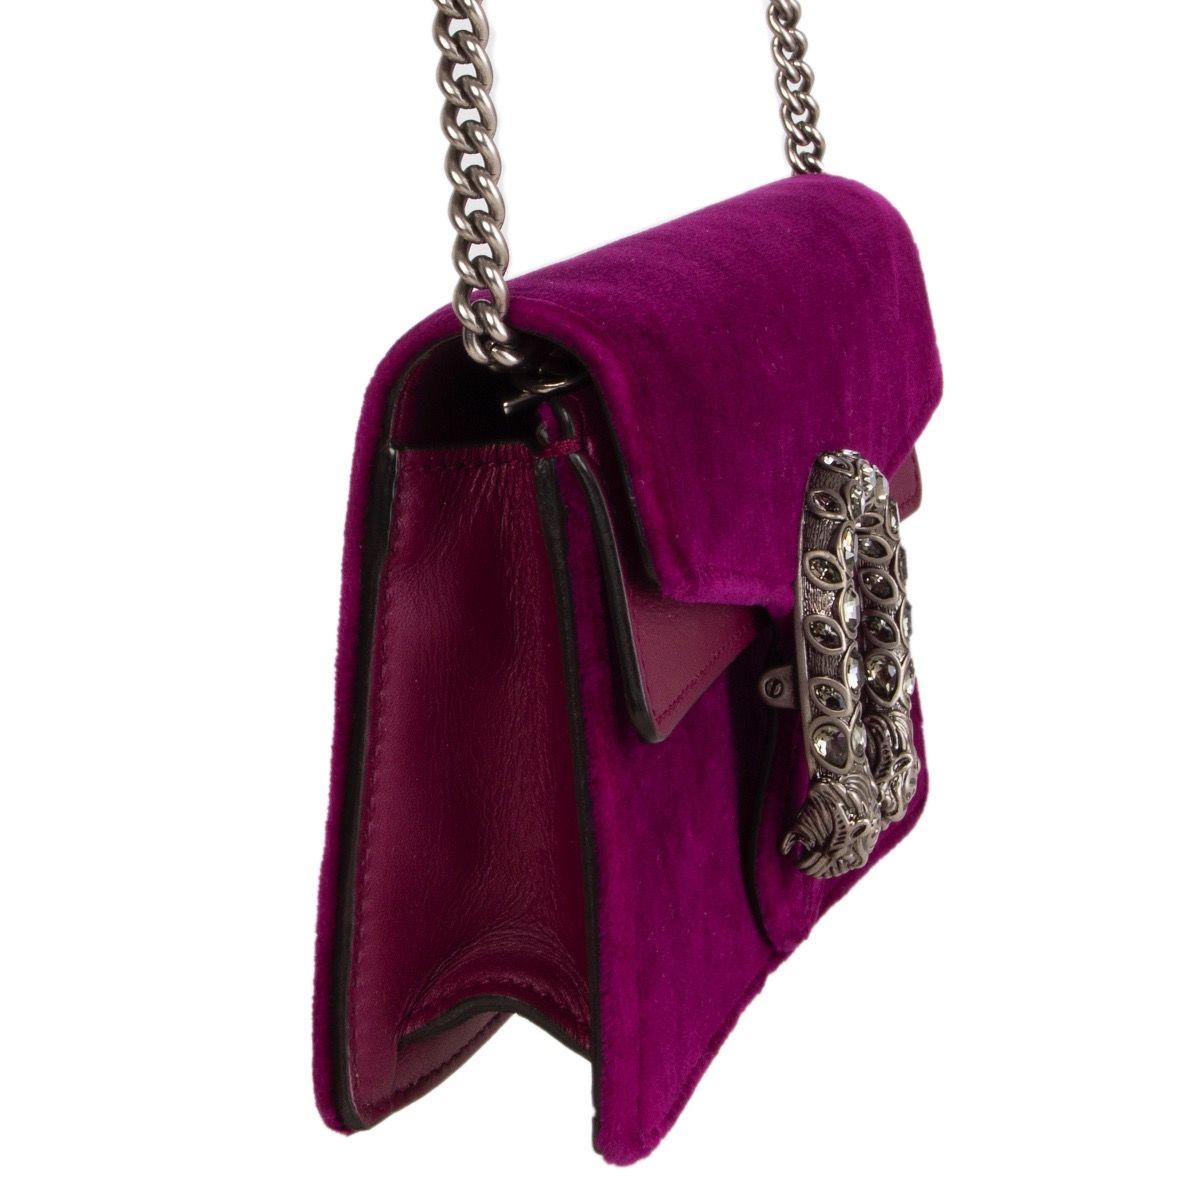 Gucci 'Dionysus Super Mini' crossbody/clutch bag in fucsia plush velvet and smooth leather, this style comes with an optional shoulder chain and the label's signature crystal-embellished fastening. Lined in beige microfibre with a keychain. Has been